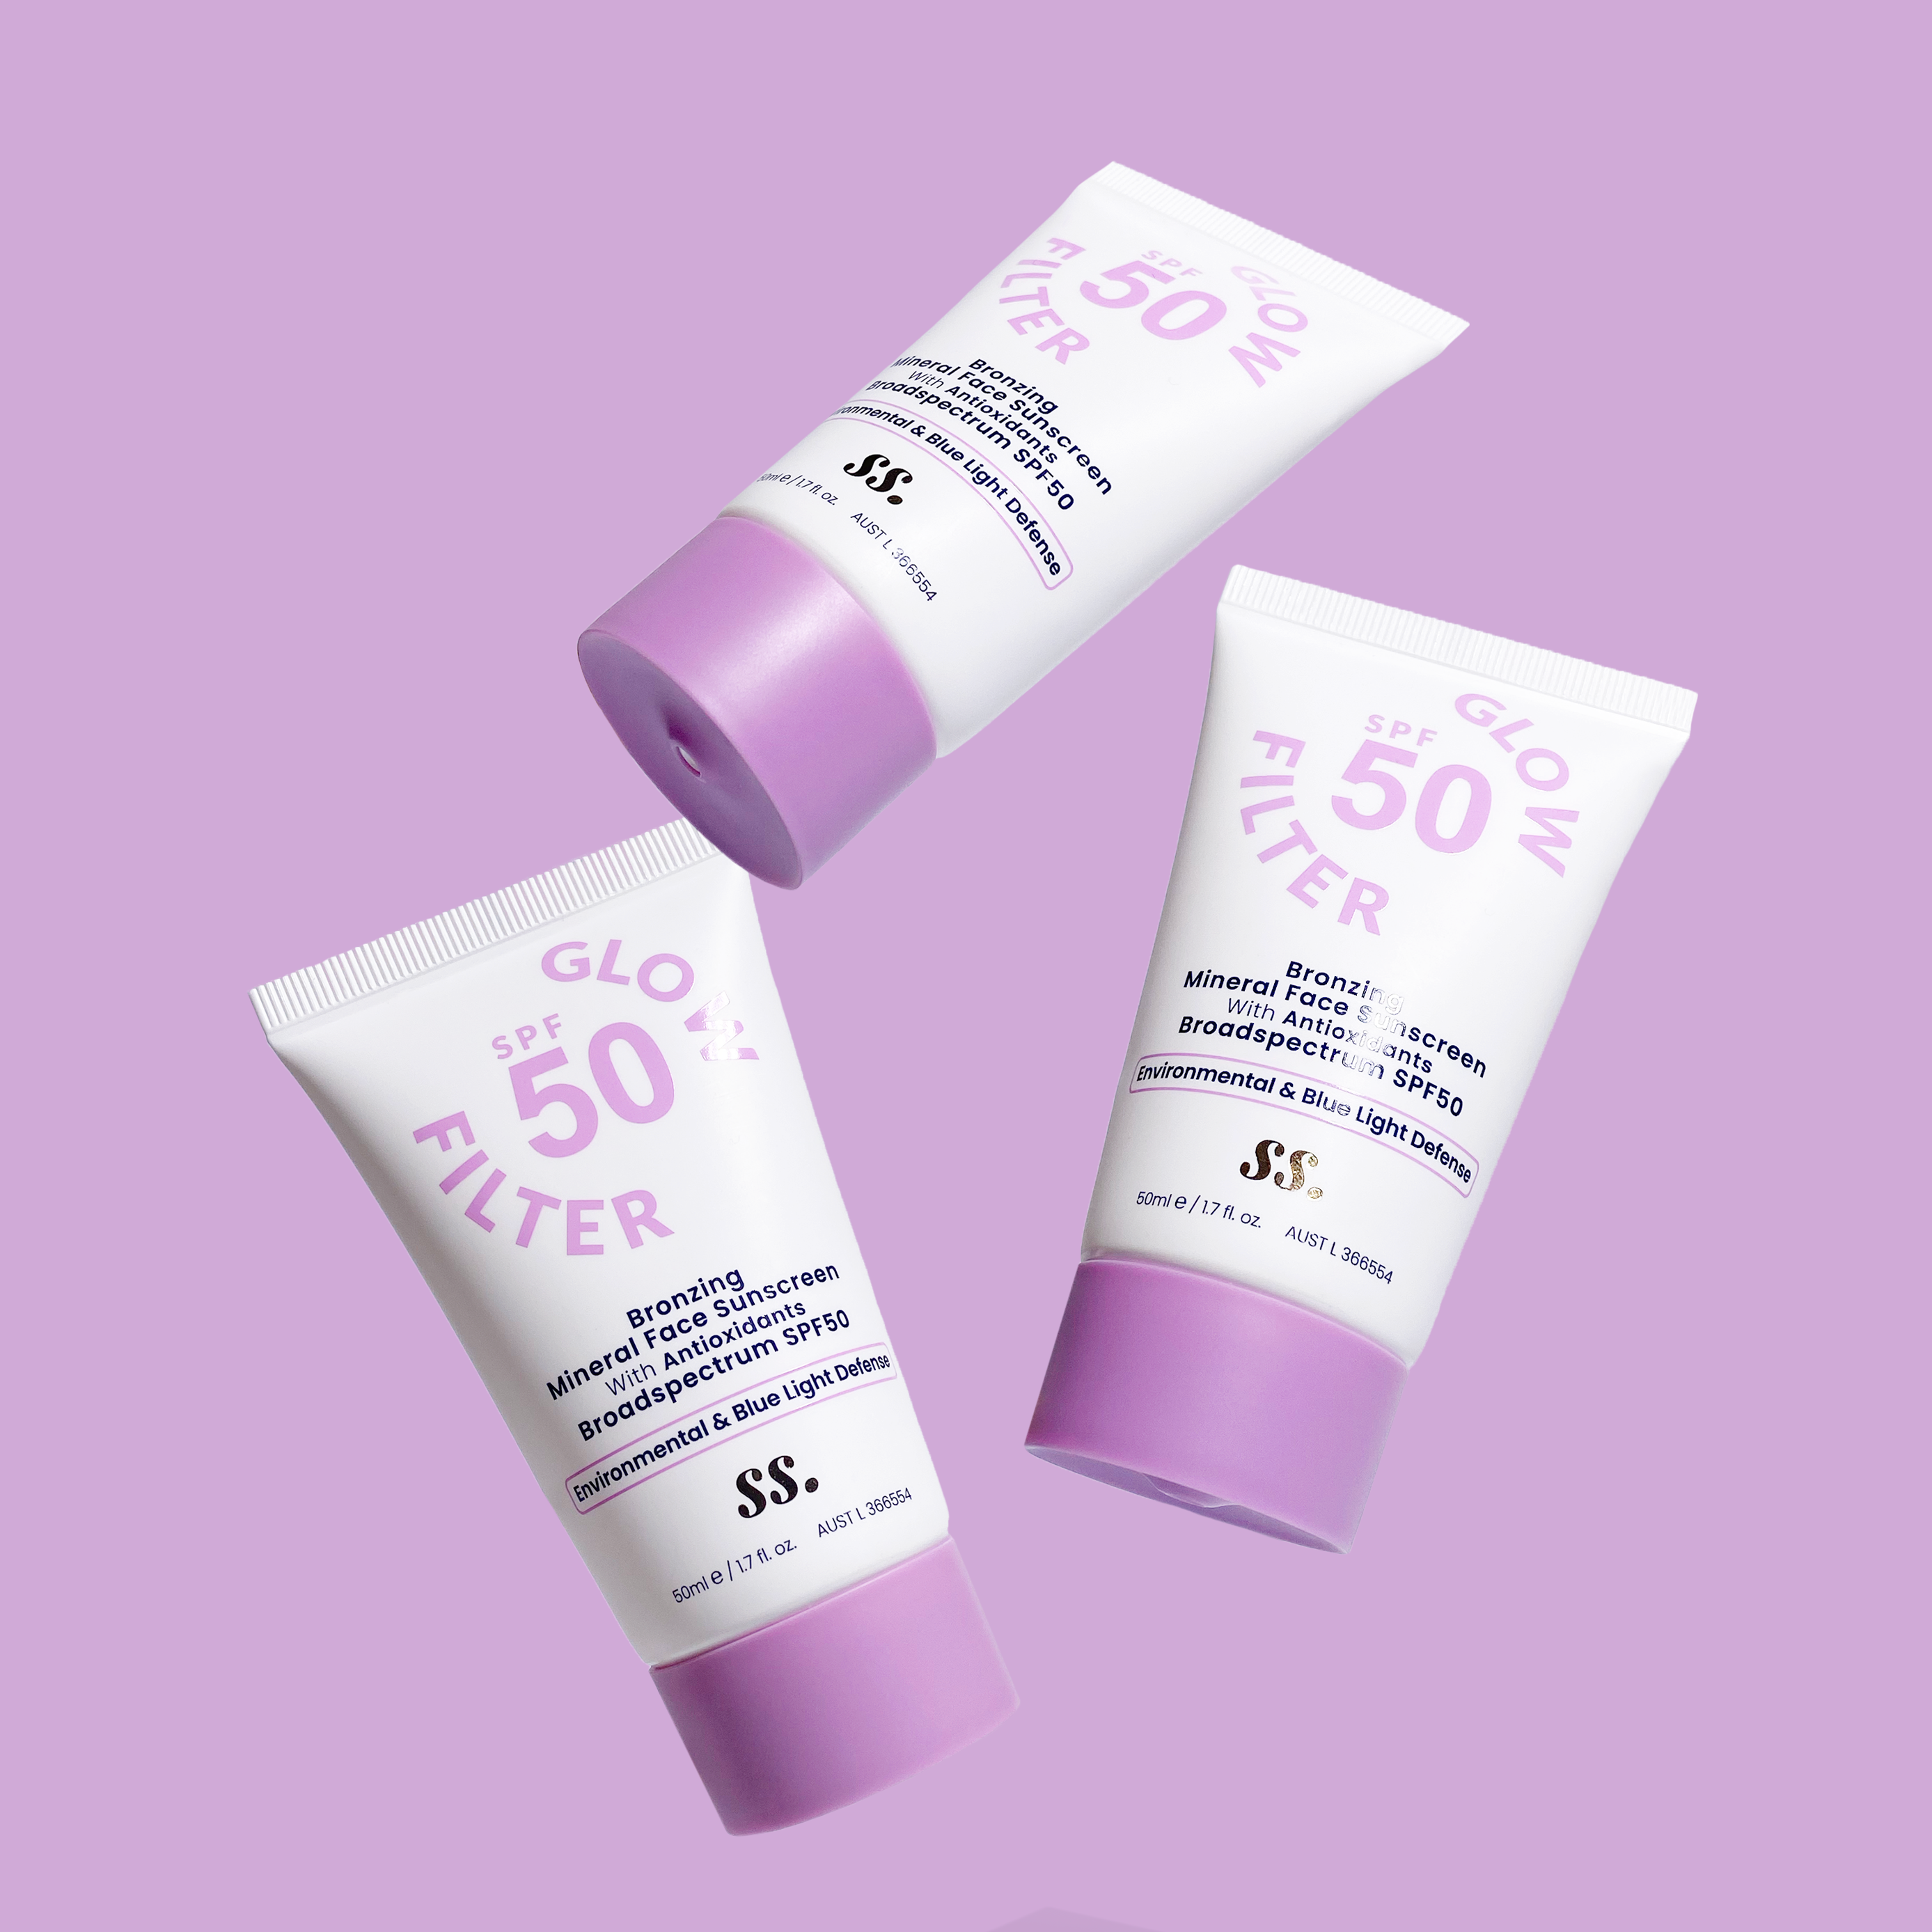 Three tubes of Sunny Skin Glow Filter SPF50 on violet background uploaded on Spa Circle Brands product listing page.